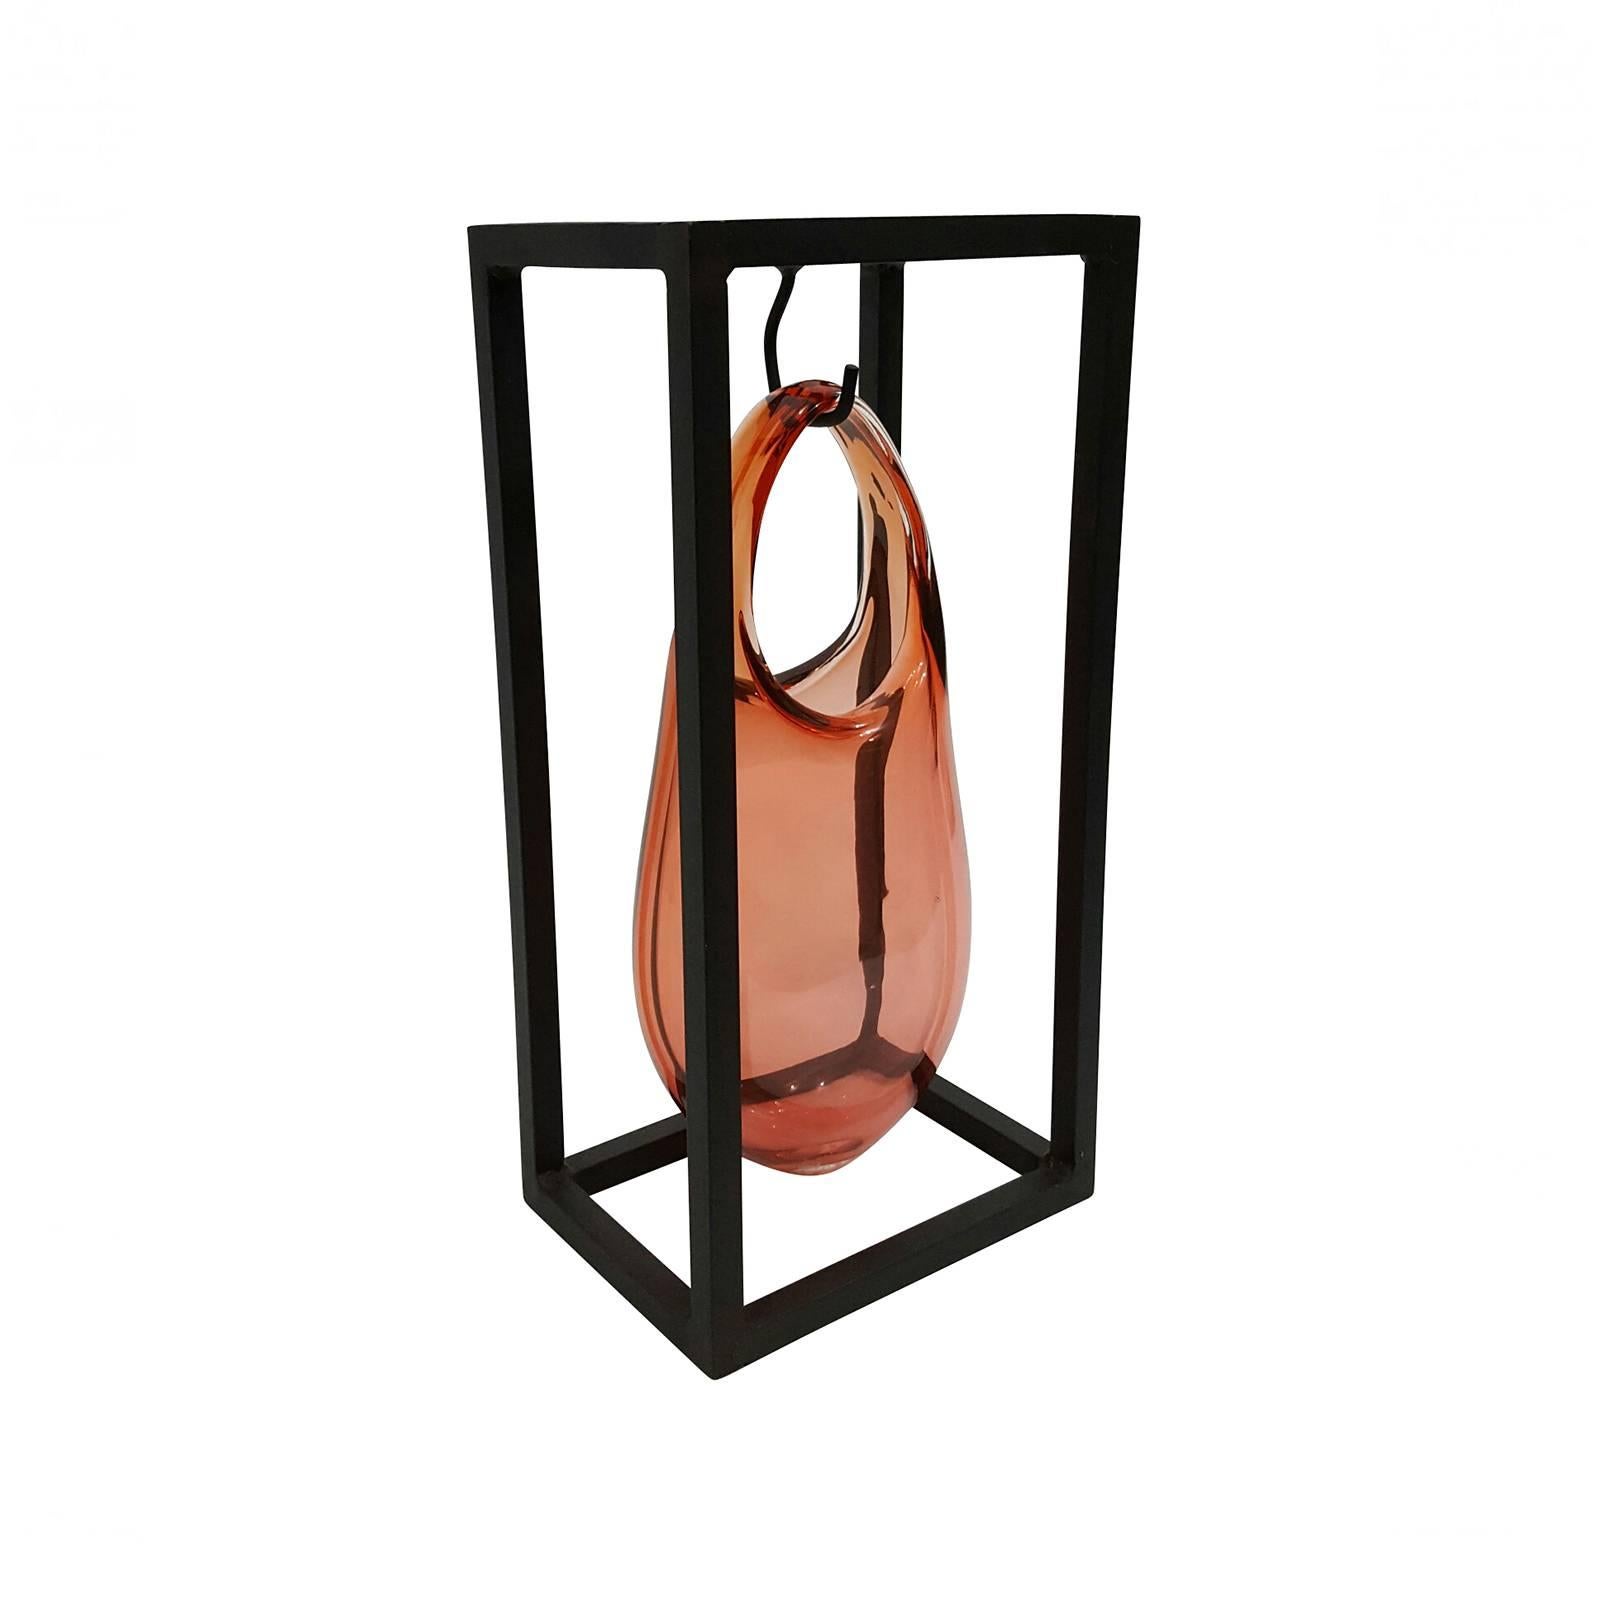 Gorgeous caged mini vessel - tangerine
Available in other sizes and color.